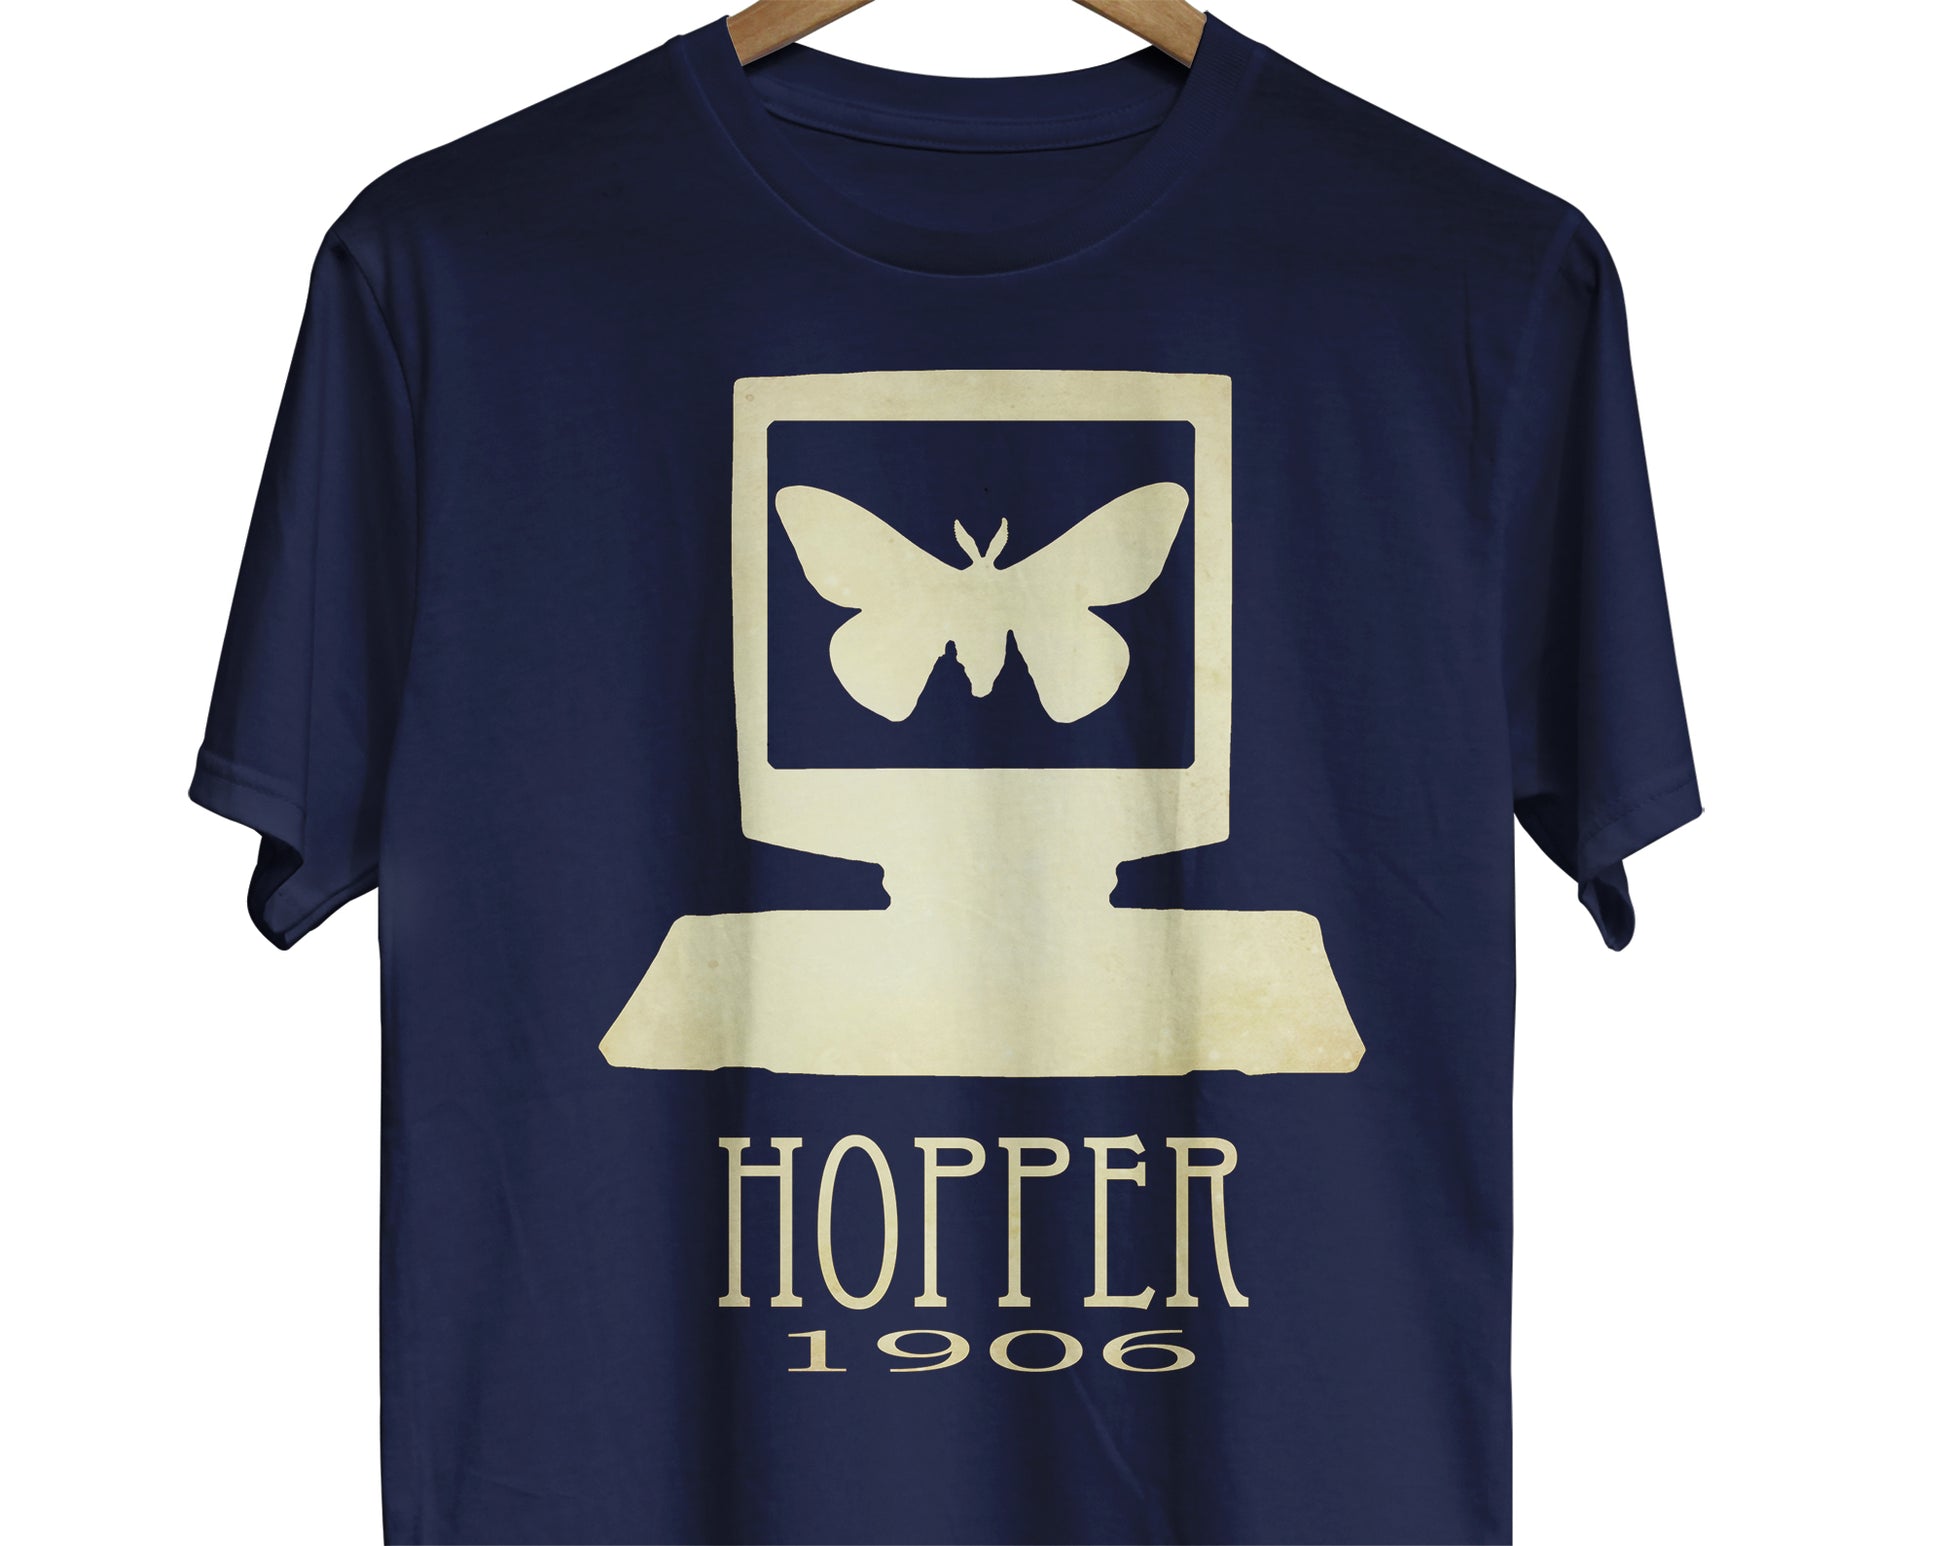 Grace Hopper computer science t-shirt with moth and computer screen image to represent debugging